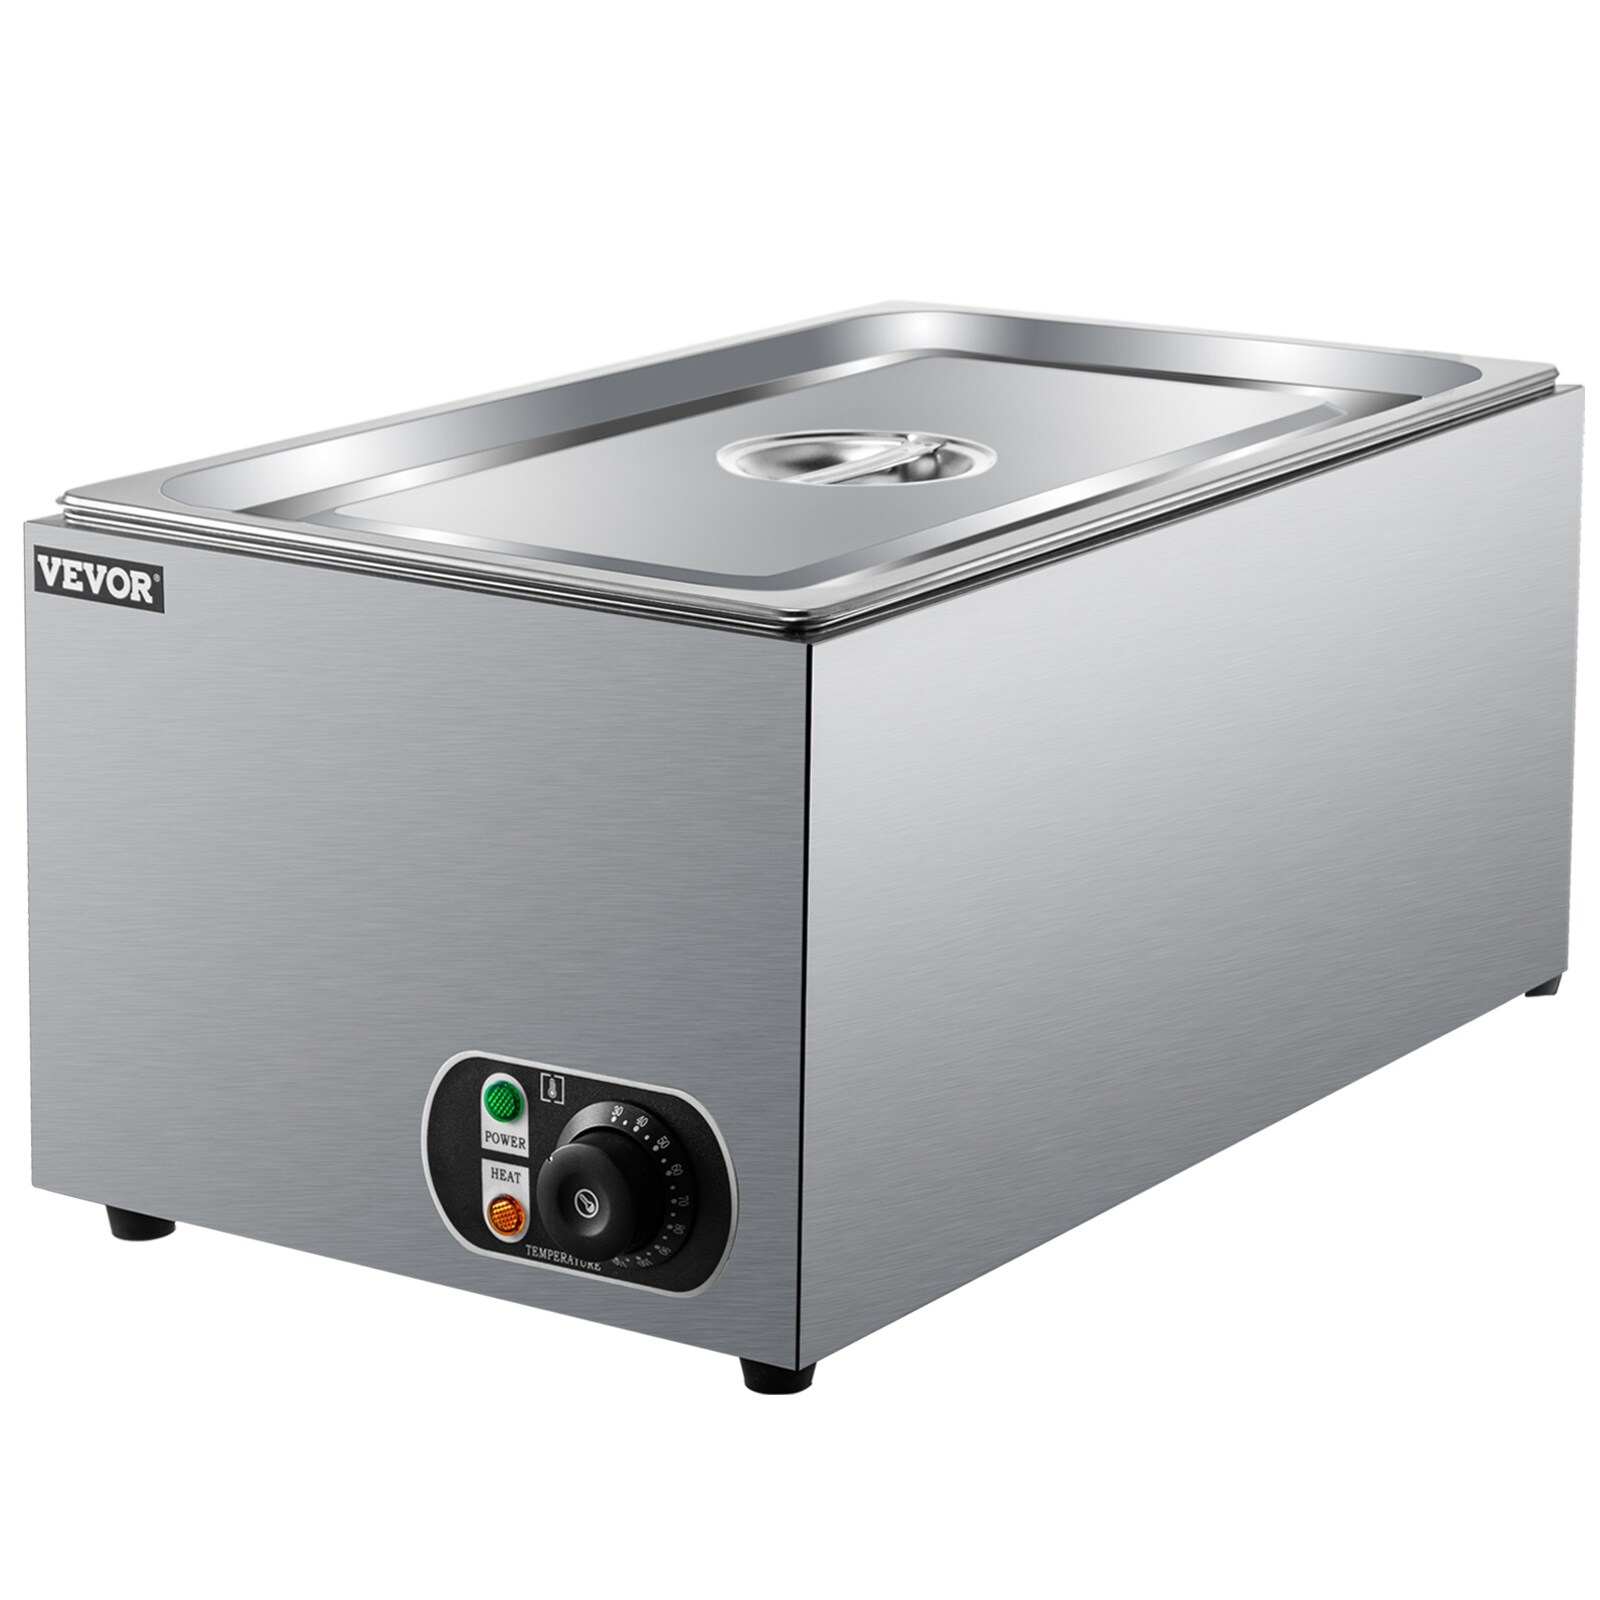 https://ak1.ostkcdn.com/images/products/is/images/direct/7f95738edc310e7a2689d464f444e4d4fdf31a11/VEVOR-Commercial-Food-Warmer-Bain-Marie-27Qt-Full-Size-Buffet-Food-Warmer-SUS.jpg